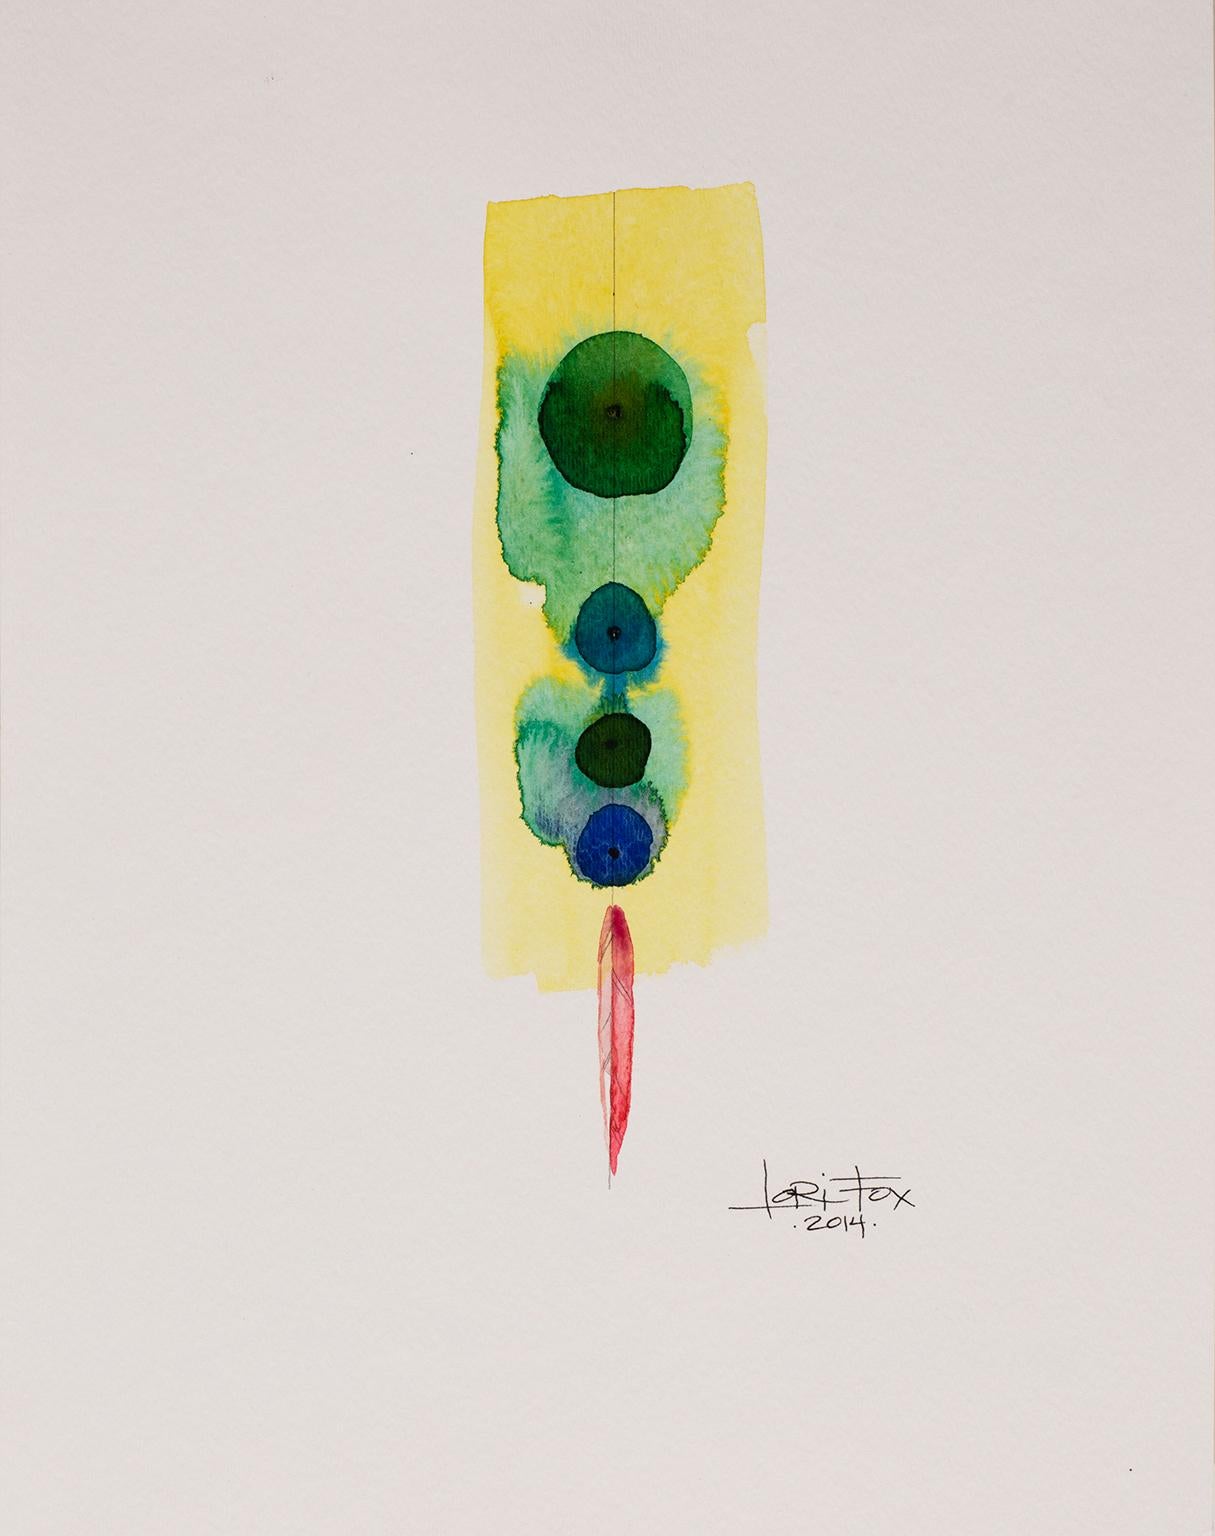 Totem 004, 2014 by Lori Fox
Watercolor and graphite on paper. 
Yellow, green, blue and red hues make this original from the Totem series by Lori Fox. 
14 x 11 inch unframed.  
Framed size is 15.25 x 12.25 x 1.75 inch (ask about framed price)

Totem: